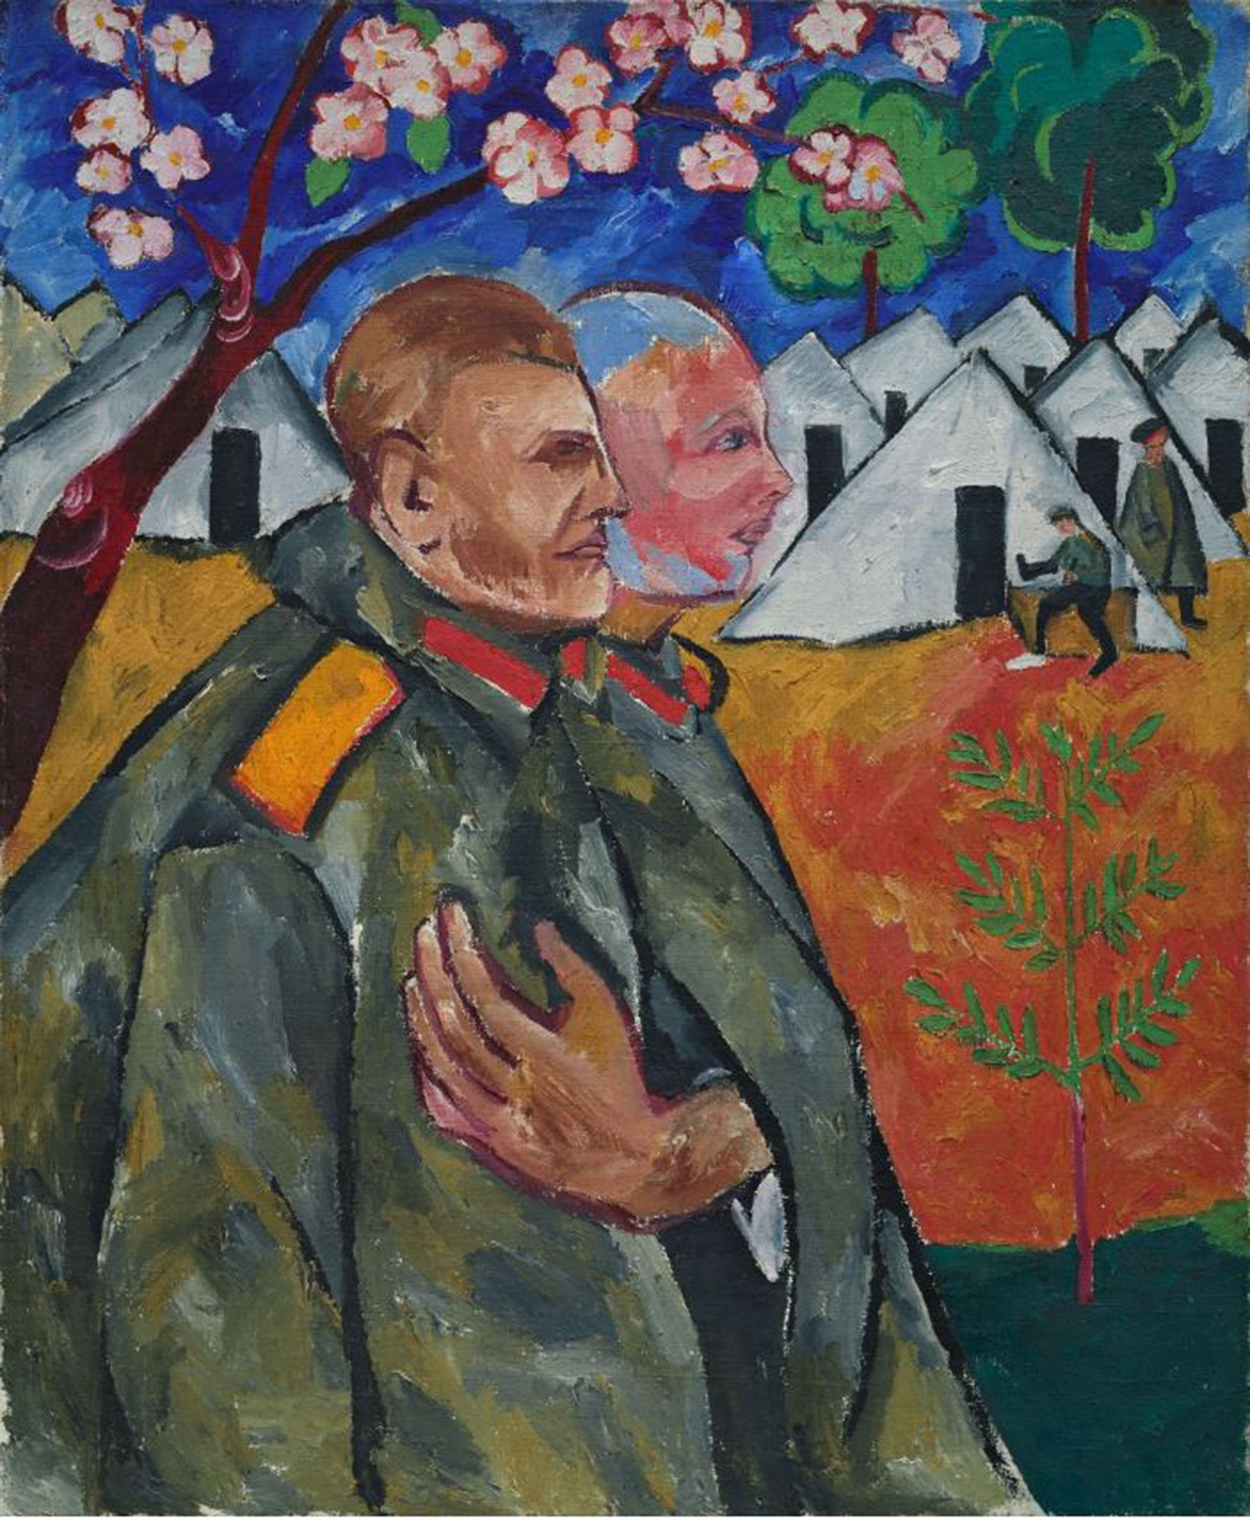 Portrait of Mikhail Larionov and his Platoon Commander by Natalia Goncharova - 1911 - 119 x 97 cm State Russian Museum